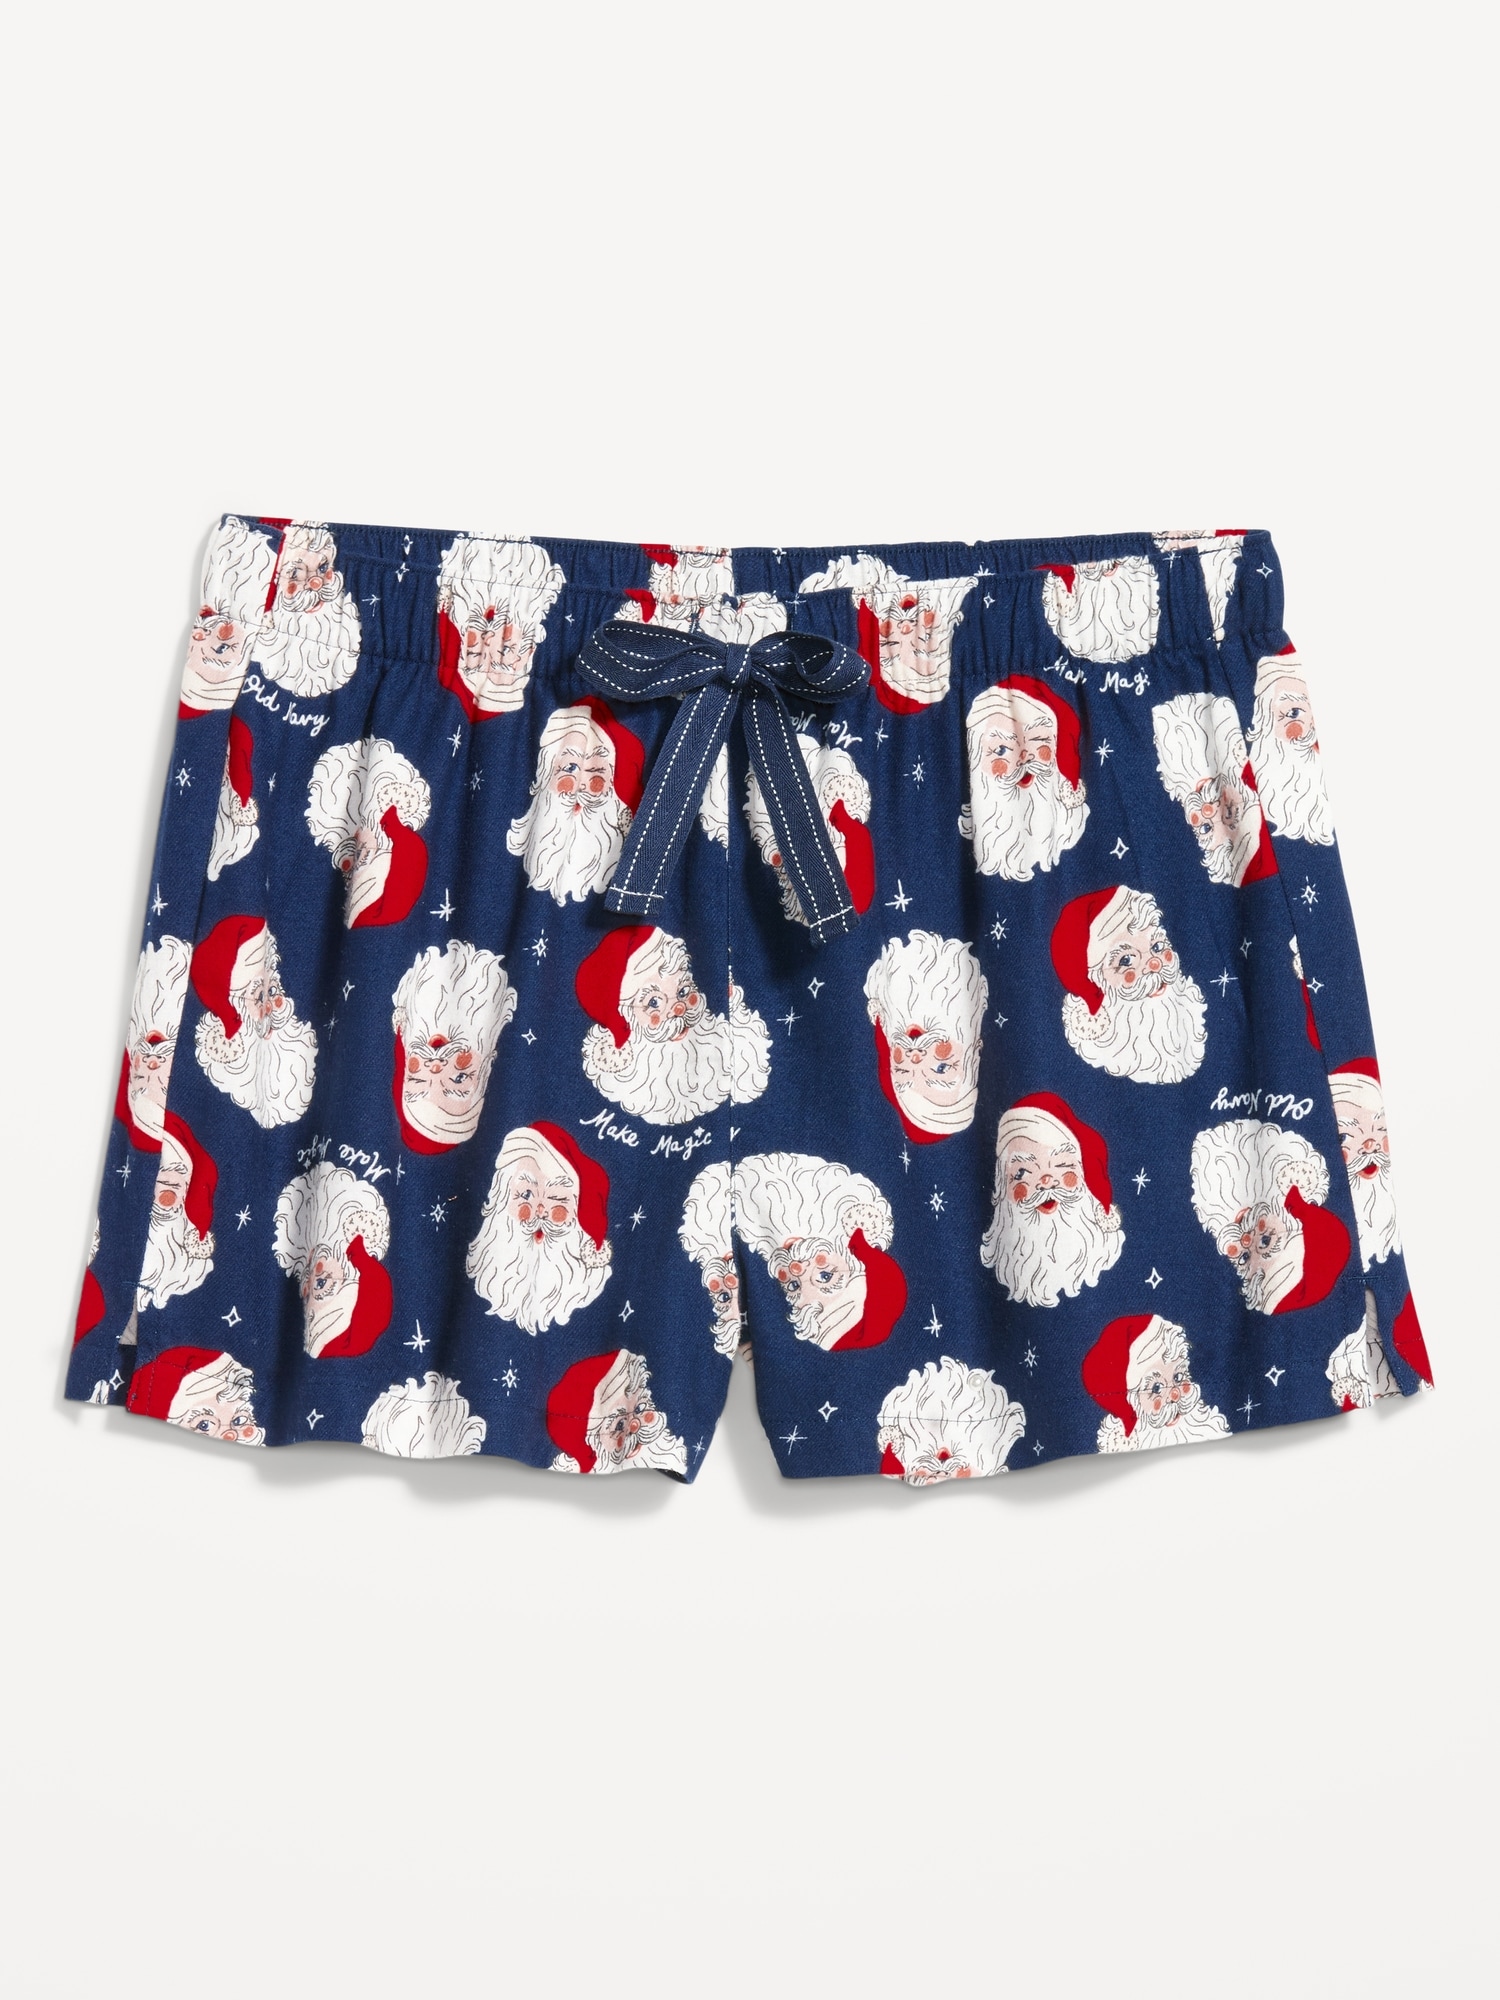 Matching Flannel Pajama Shorts for Women -- 2.5-inch inseam